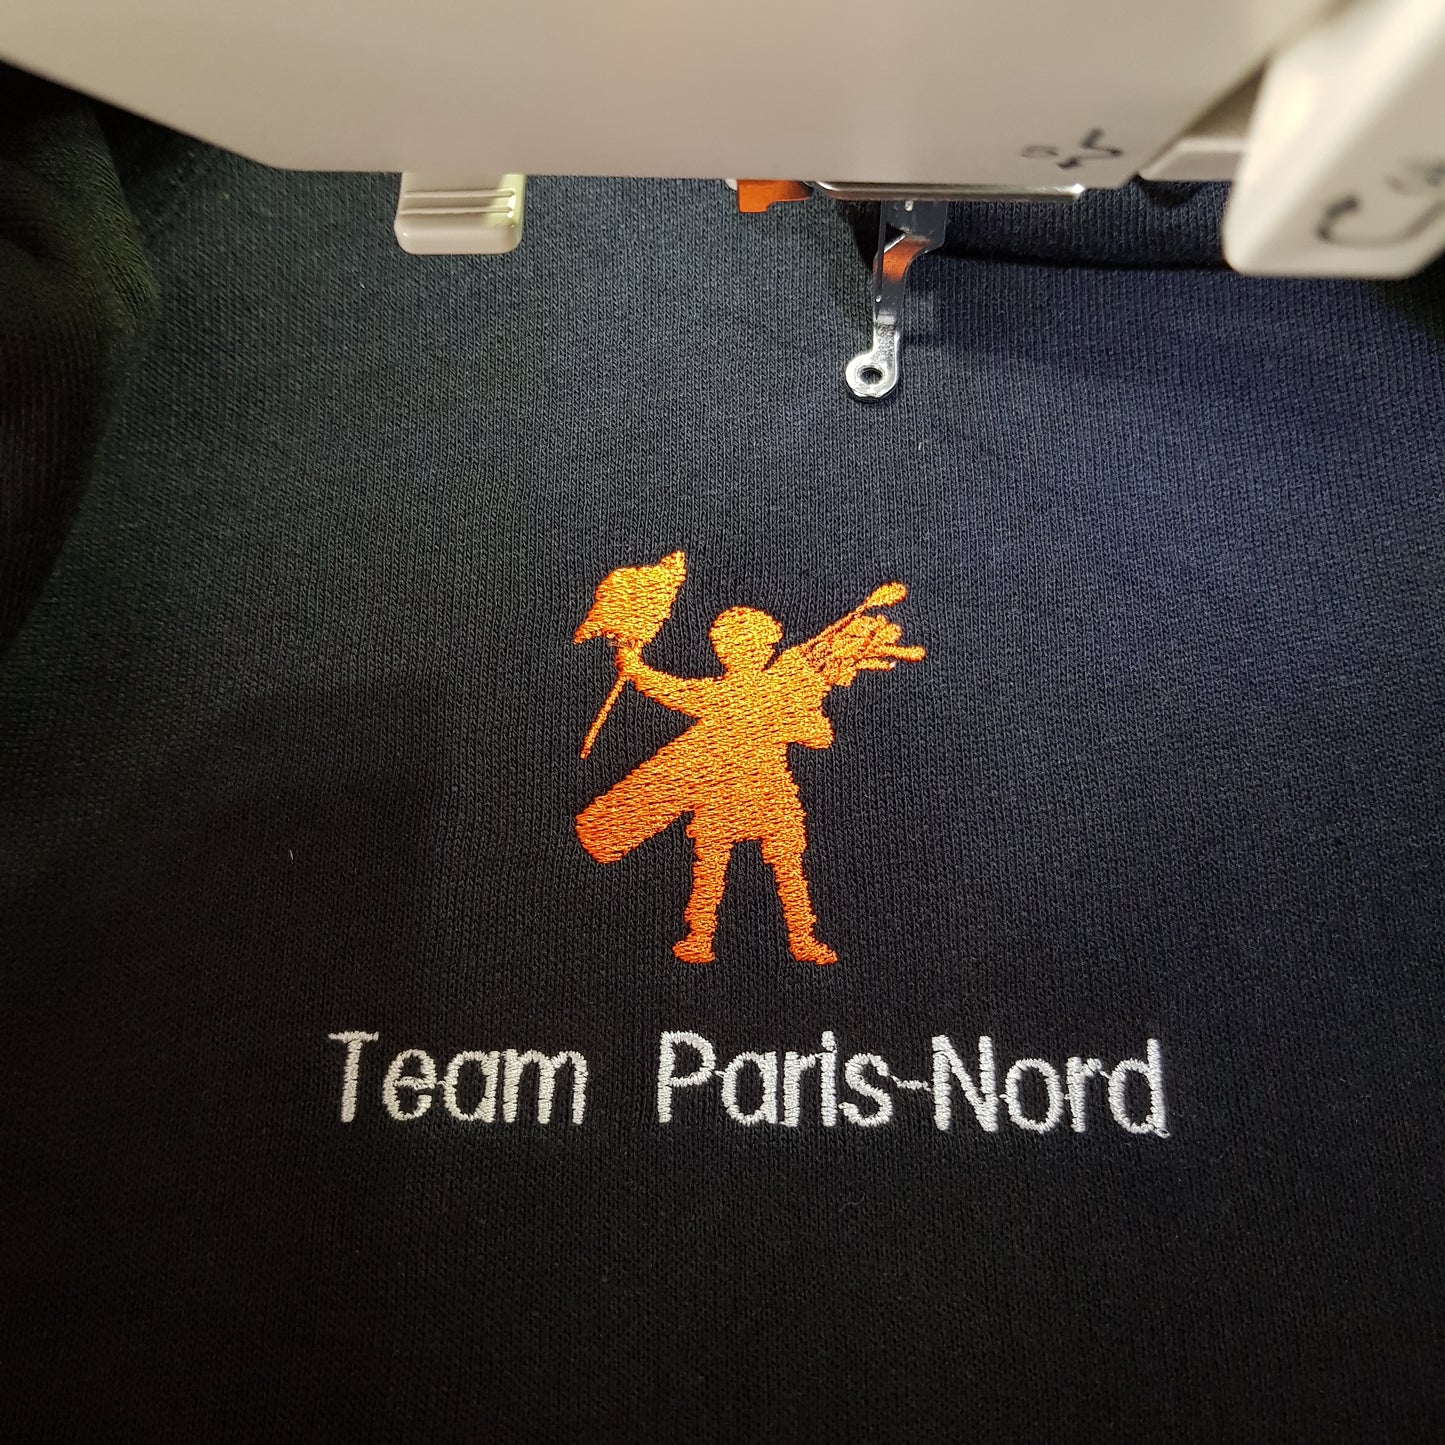 Service broderie - Exemple